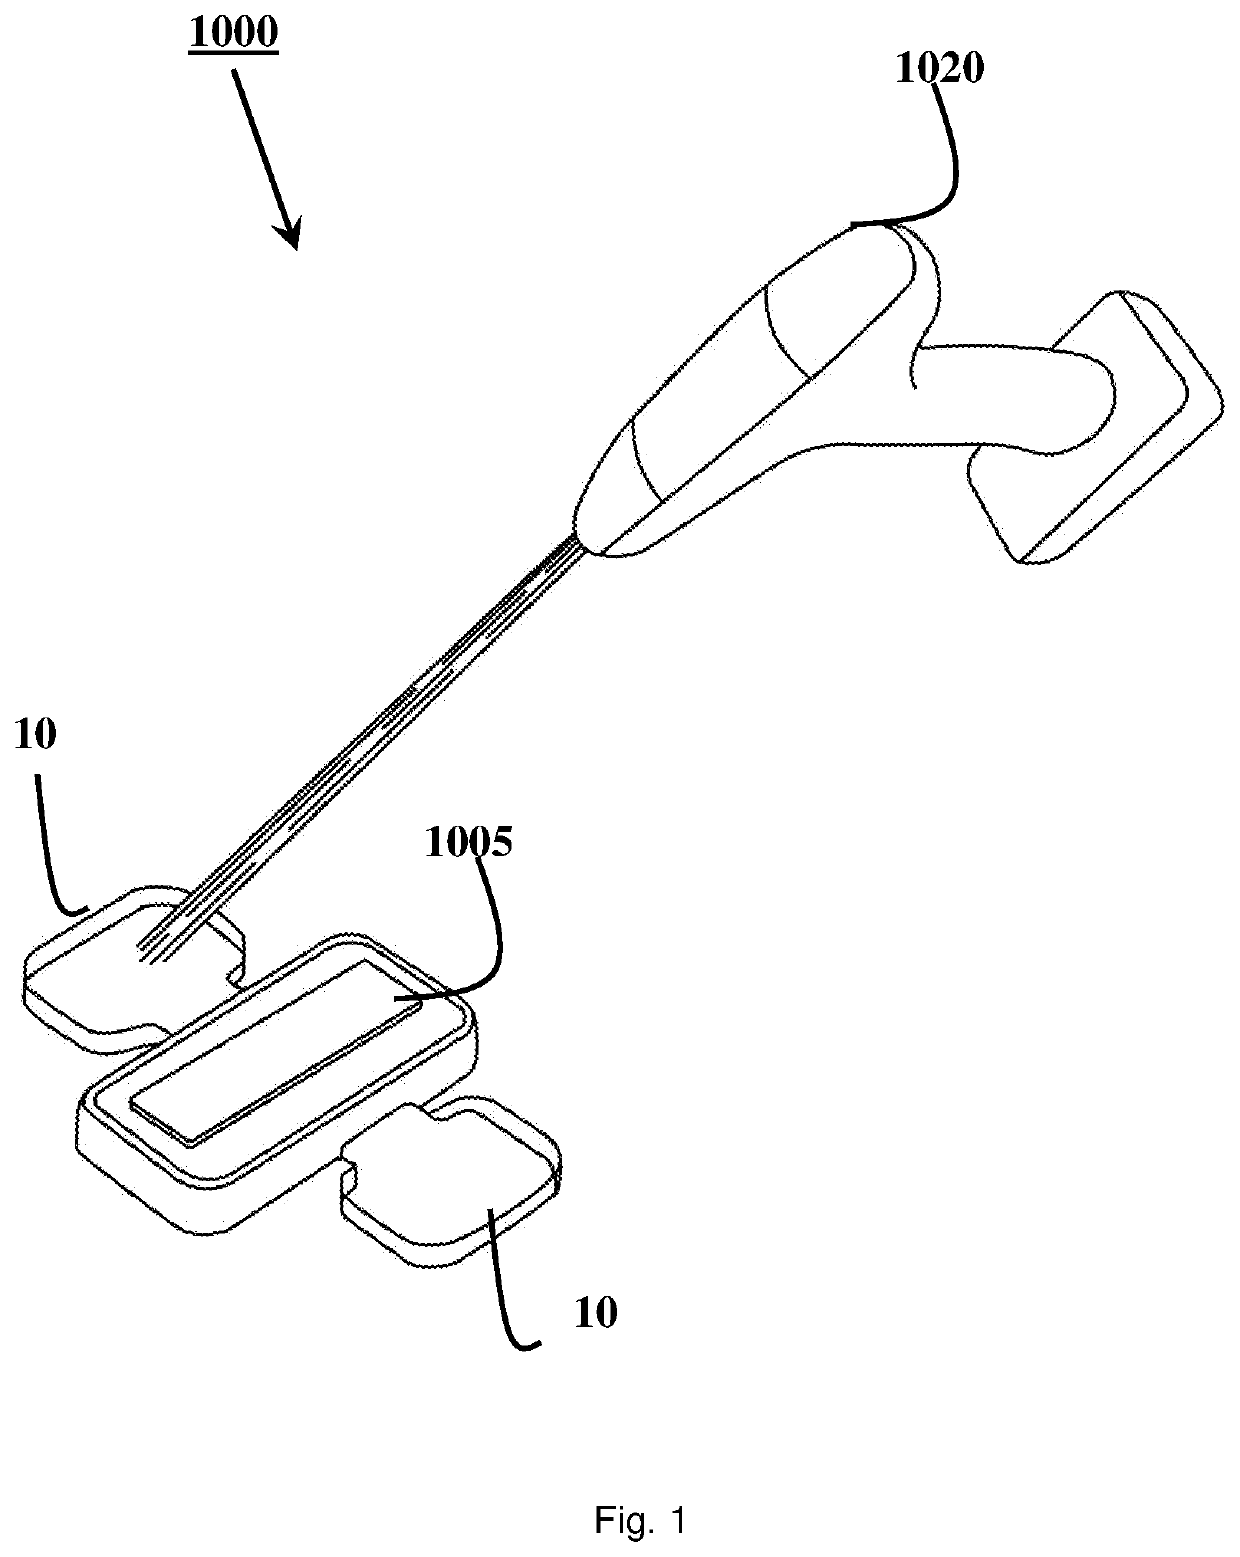 An attachment means for attaching a medical device to tissue, a system for attaching a medical device to tissue, a medical device having an attachment means, a method of attaching a medical device to tissue, and a method of manufacturing an attachment means